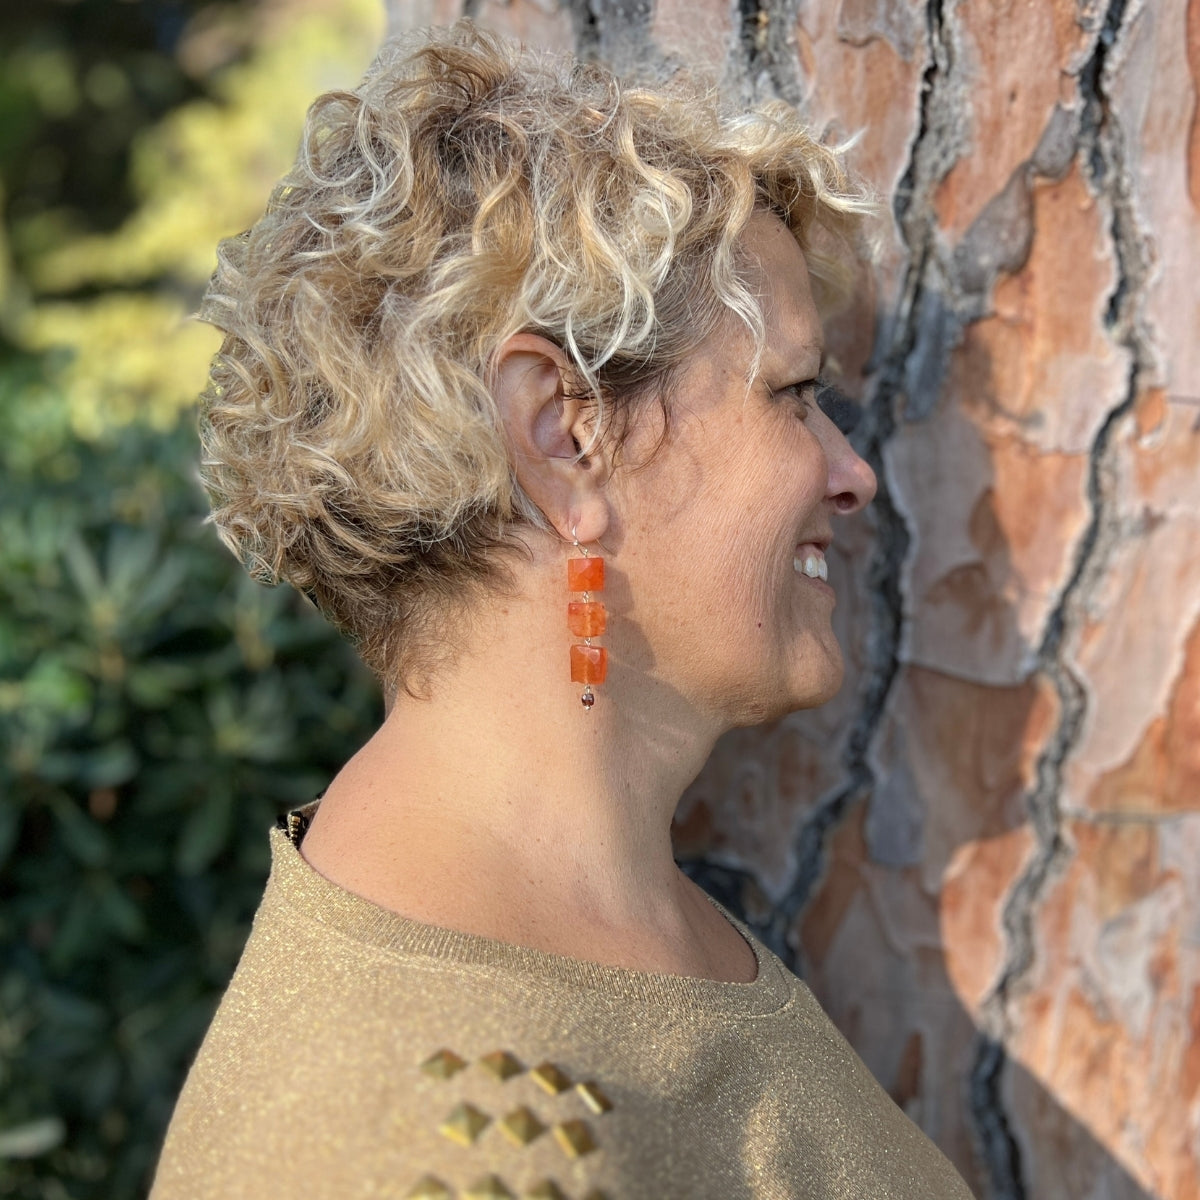 Prepare to embrace radiant confidence with our "Colorful Confidence - Carnelian Earrings." These are not just earrings; they're a spirited fusion of vibrancy, boldness, and the dynamic energy of Carnelian gemstones.ergy of Carnelian gemstones.